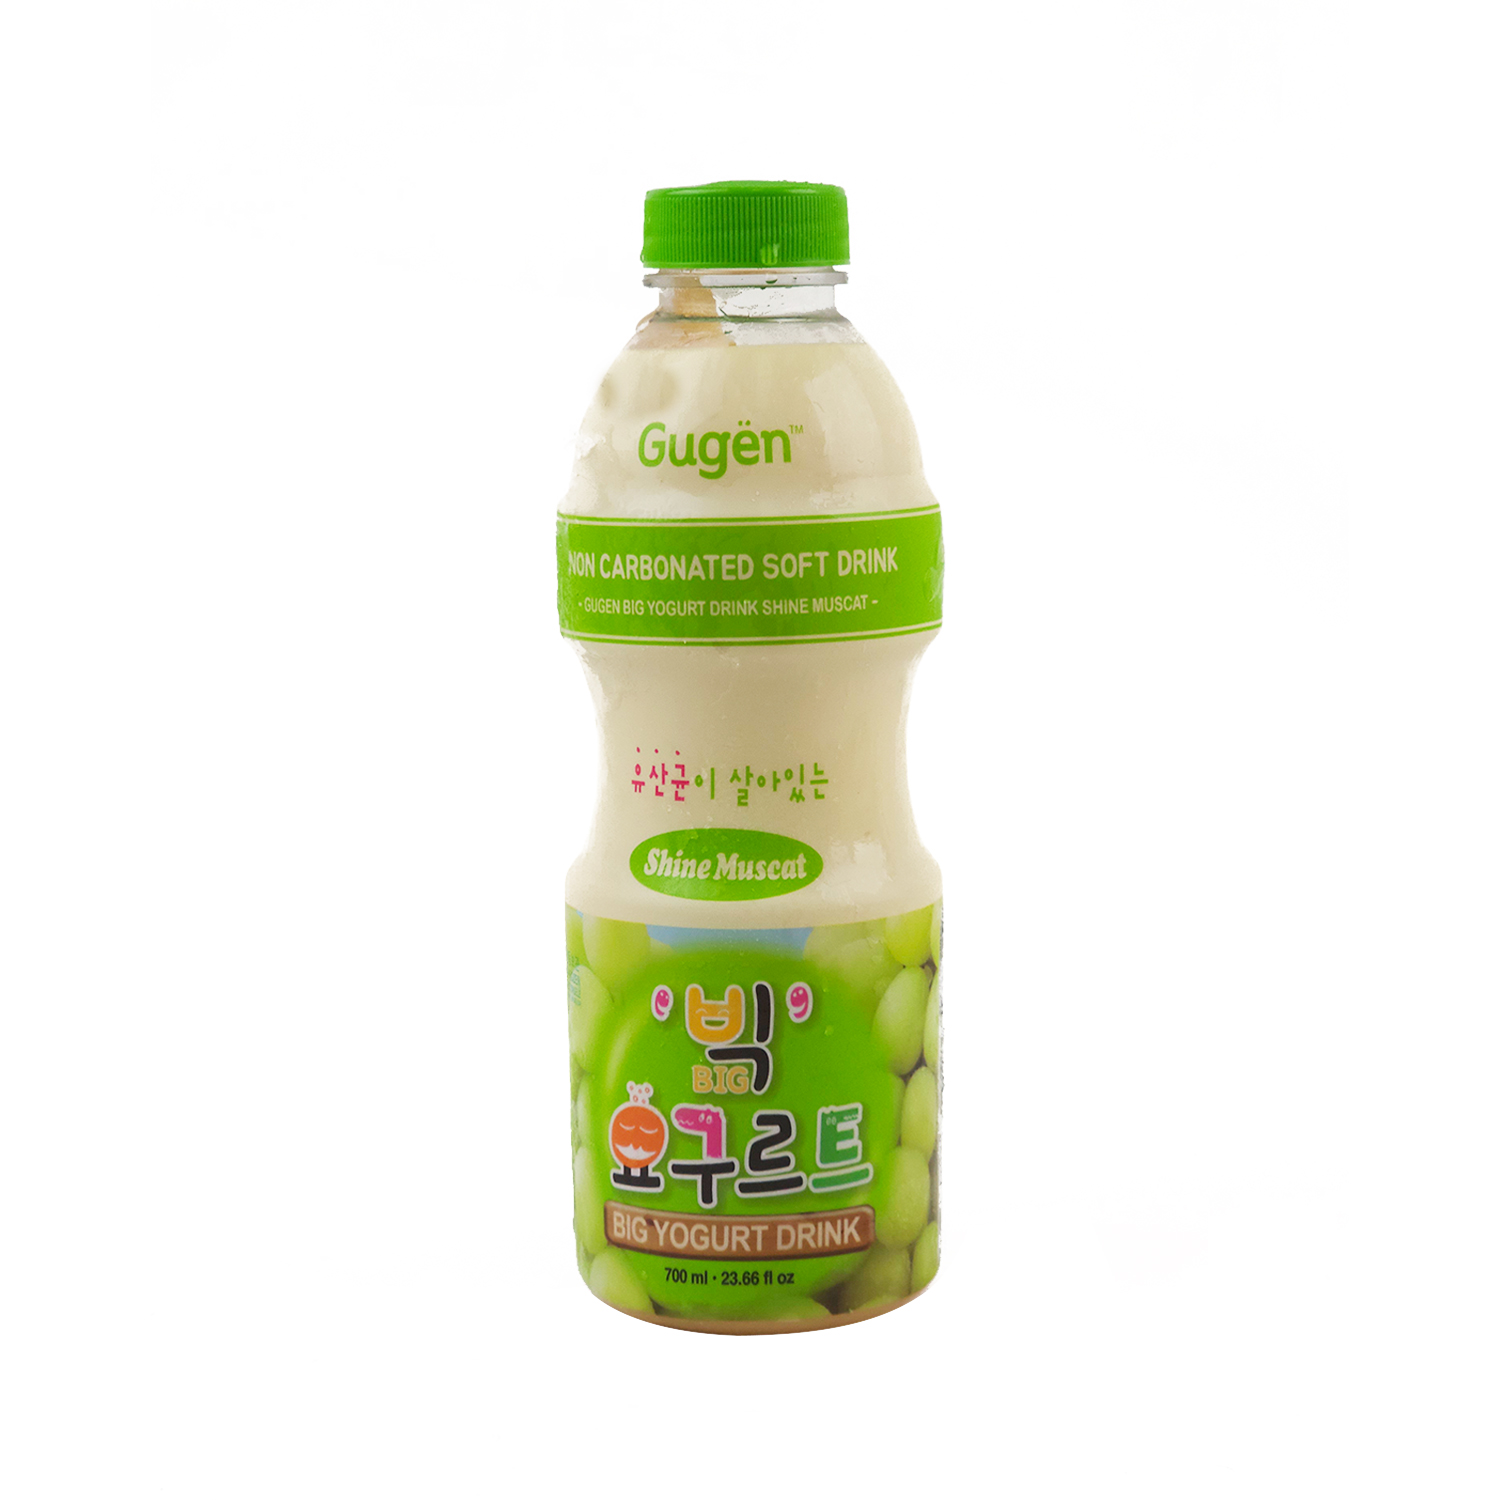 Gugen Mon Carconated Soft Drink Shine Muscat Flavour 750ml-eBest-Juice & flavoured Milk,Drinks